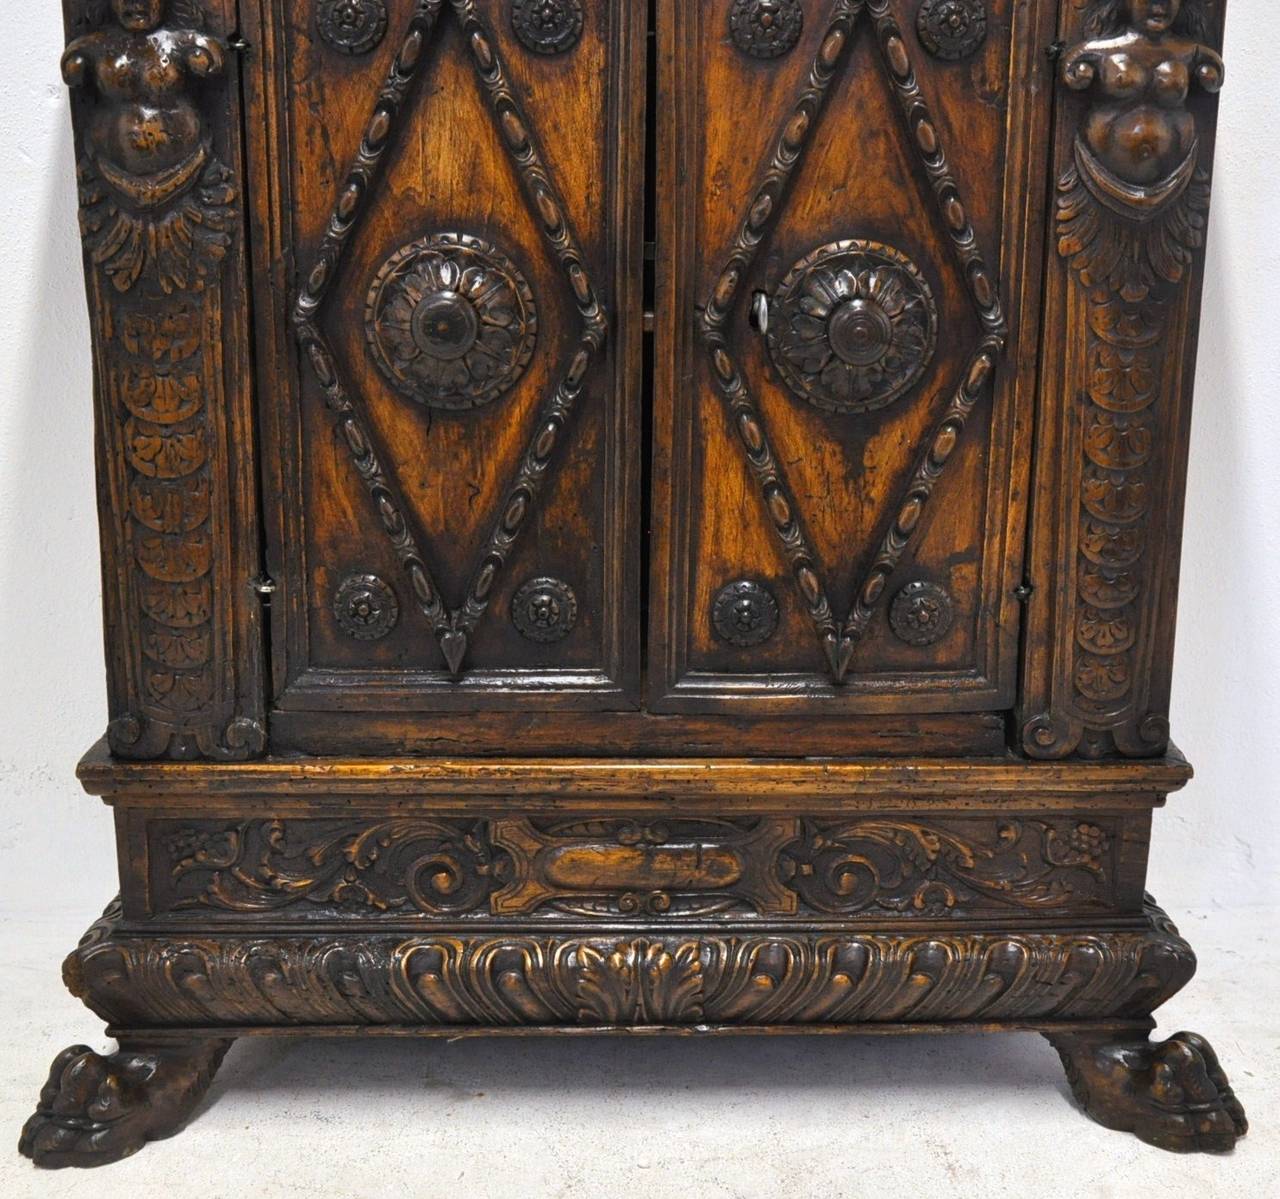 18th century walnut baroque Italian hall cabinet (c:1760), featuring a scalloped frieze with a pair of drawers above doors flanked by female busts and supported by paw feet. Beautiful patina.